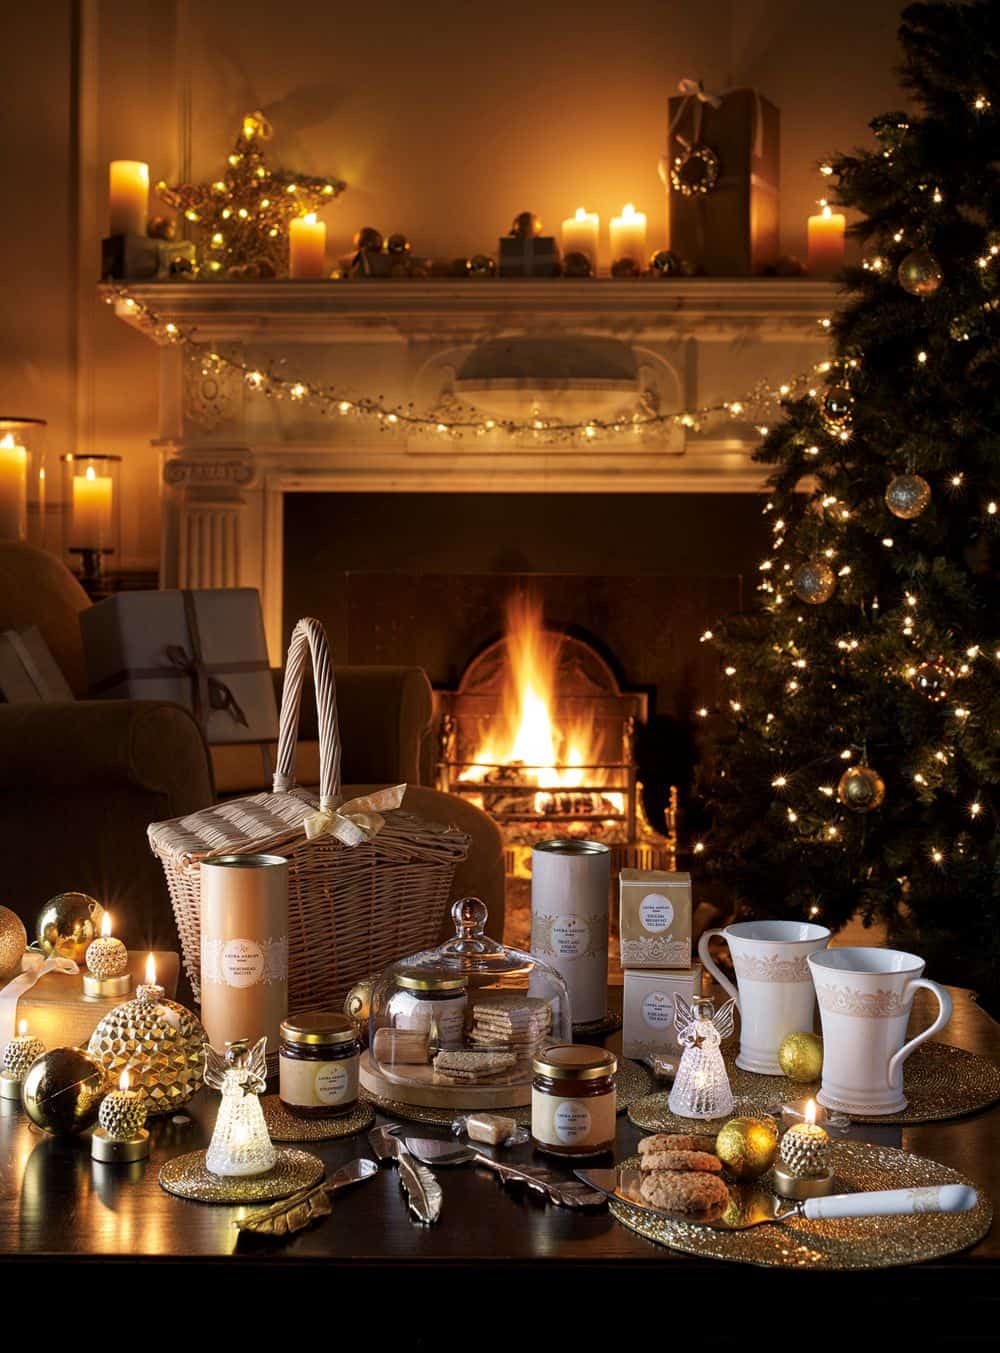 Classic Country Ideas You’ll Love To Incorporate This Holiday Season